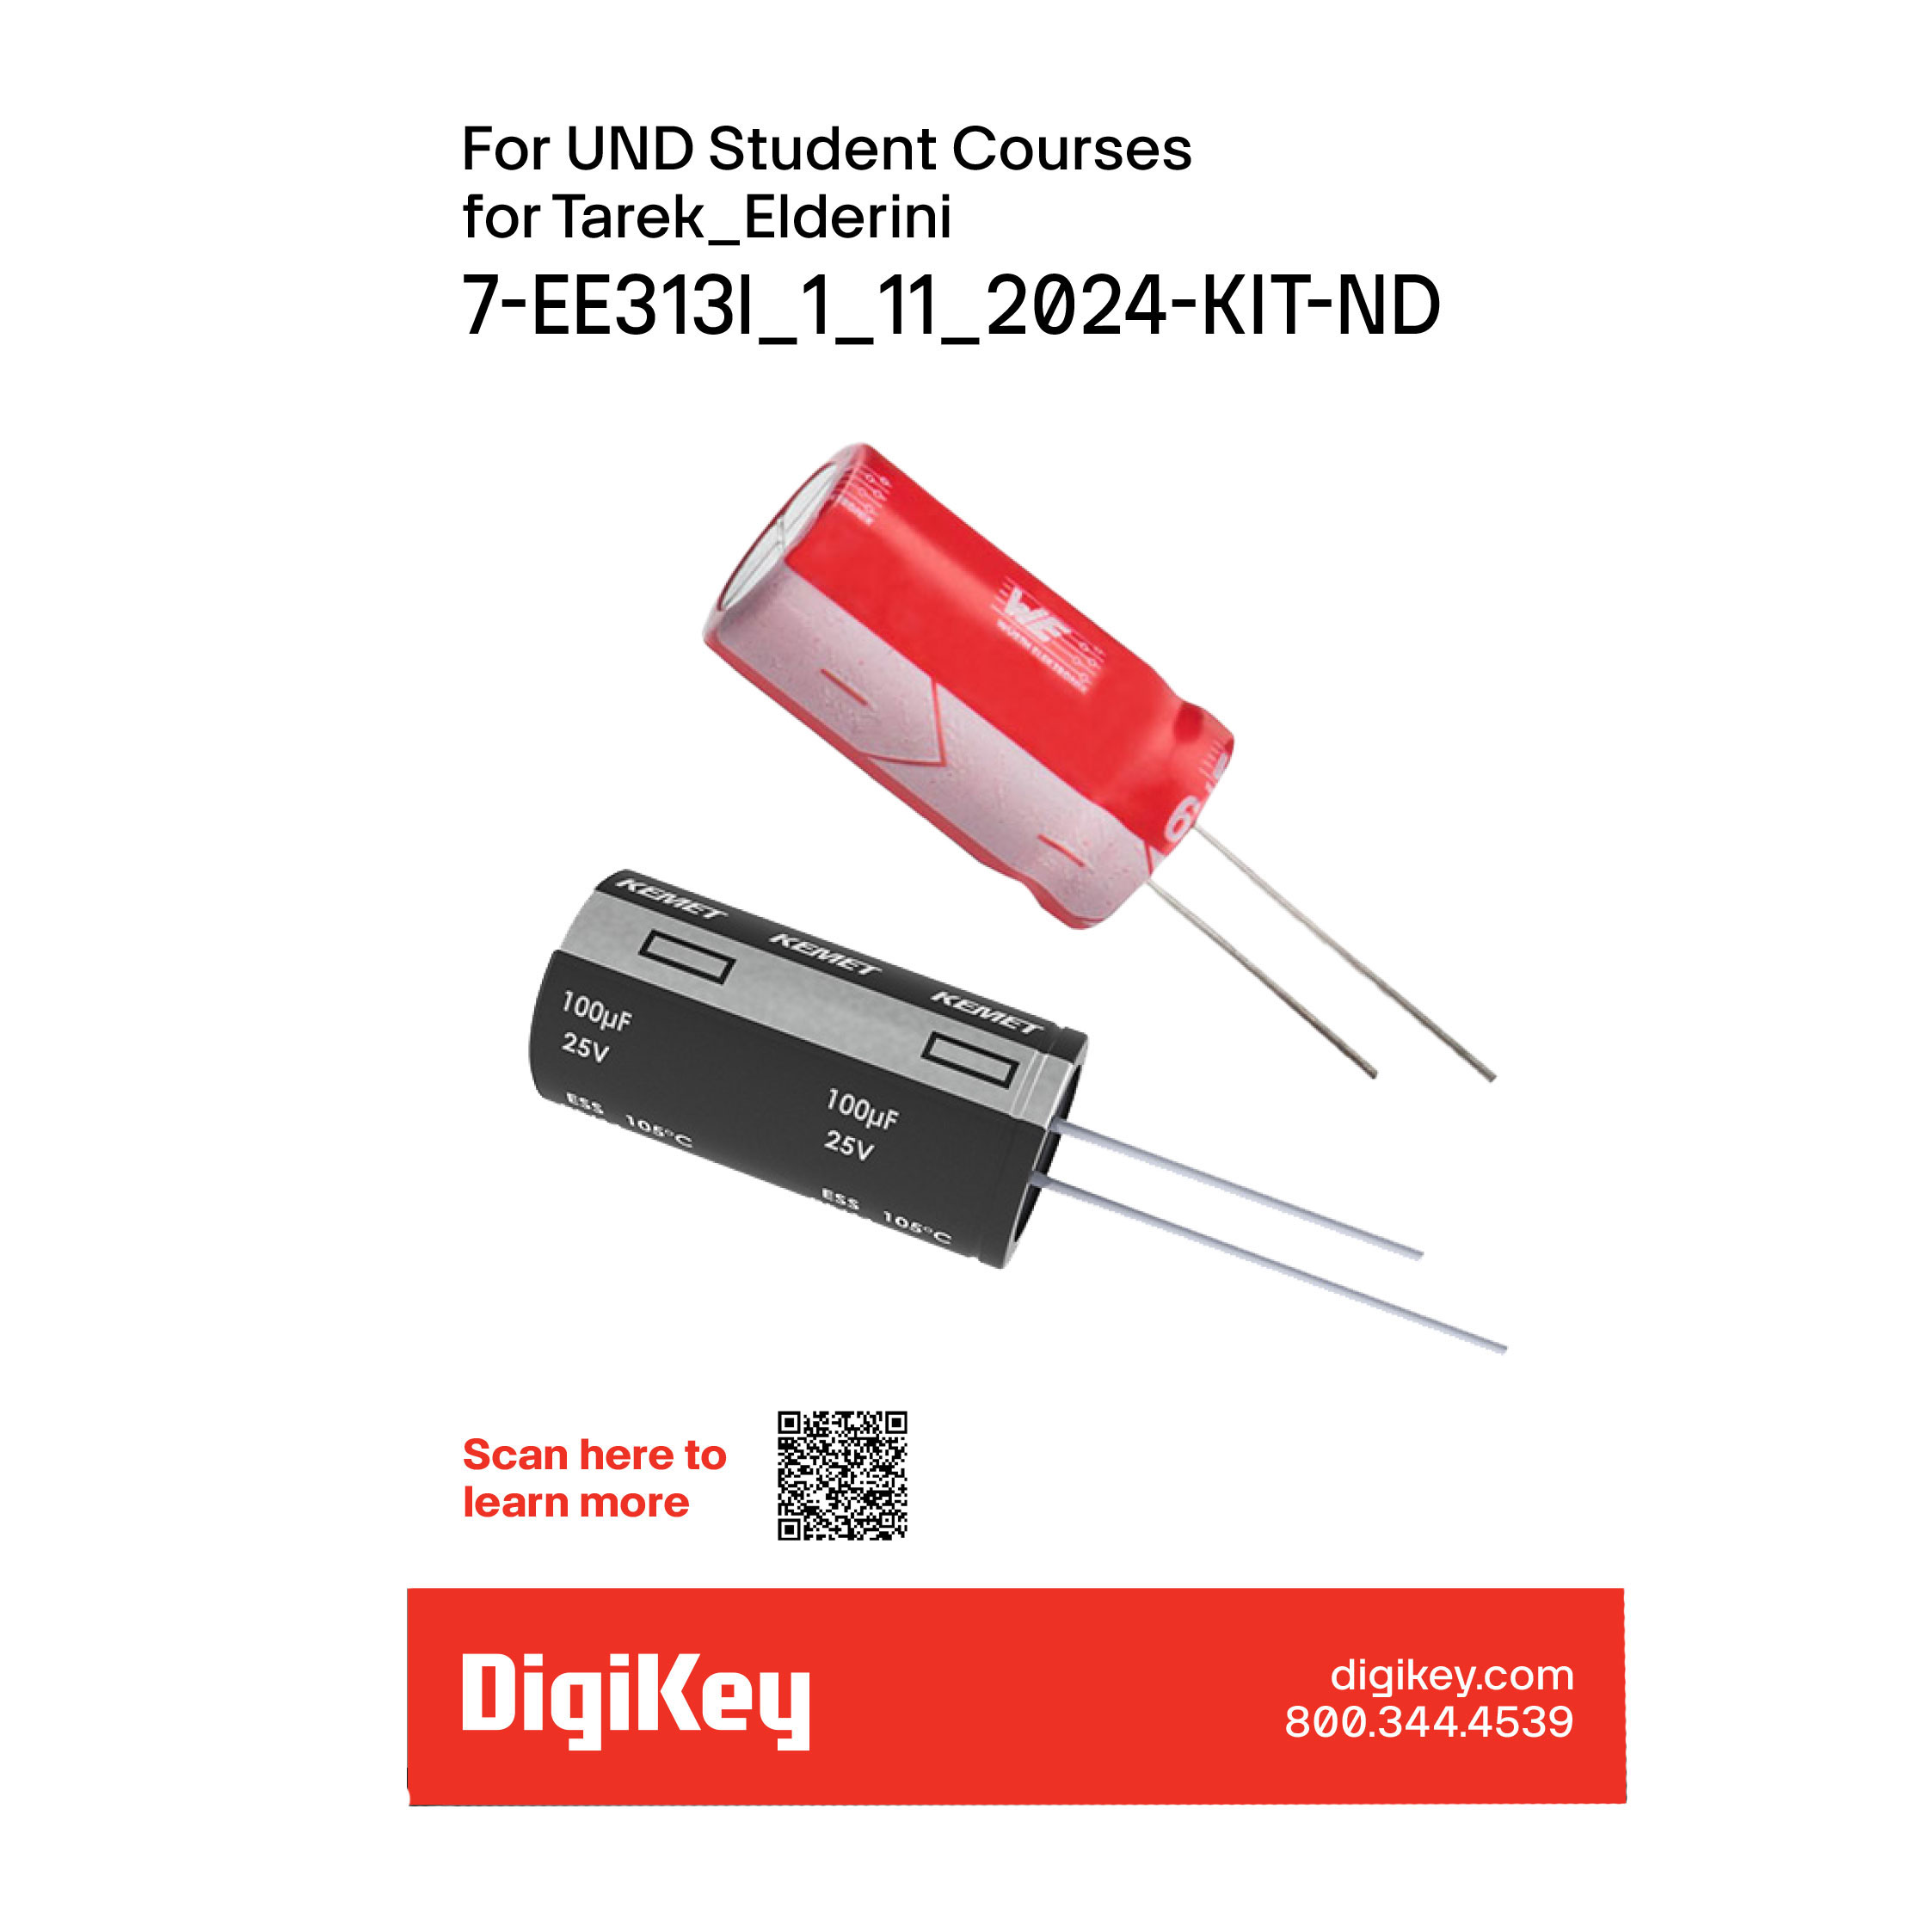 【EE313I_1_11_2024】FOR UND STUDENT COURSES FOR TERE